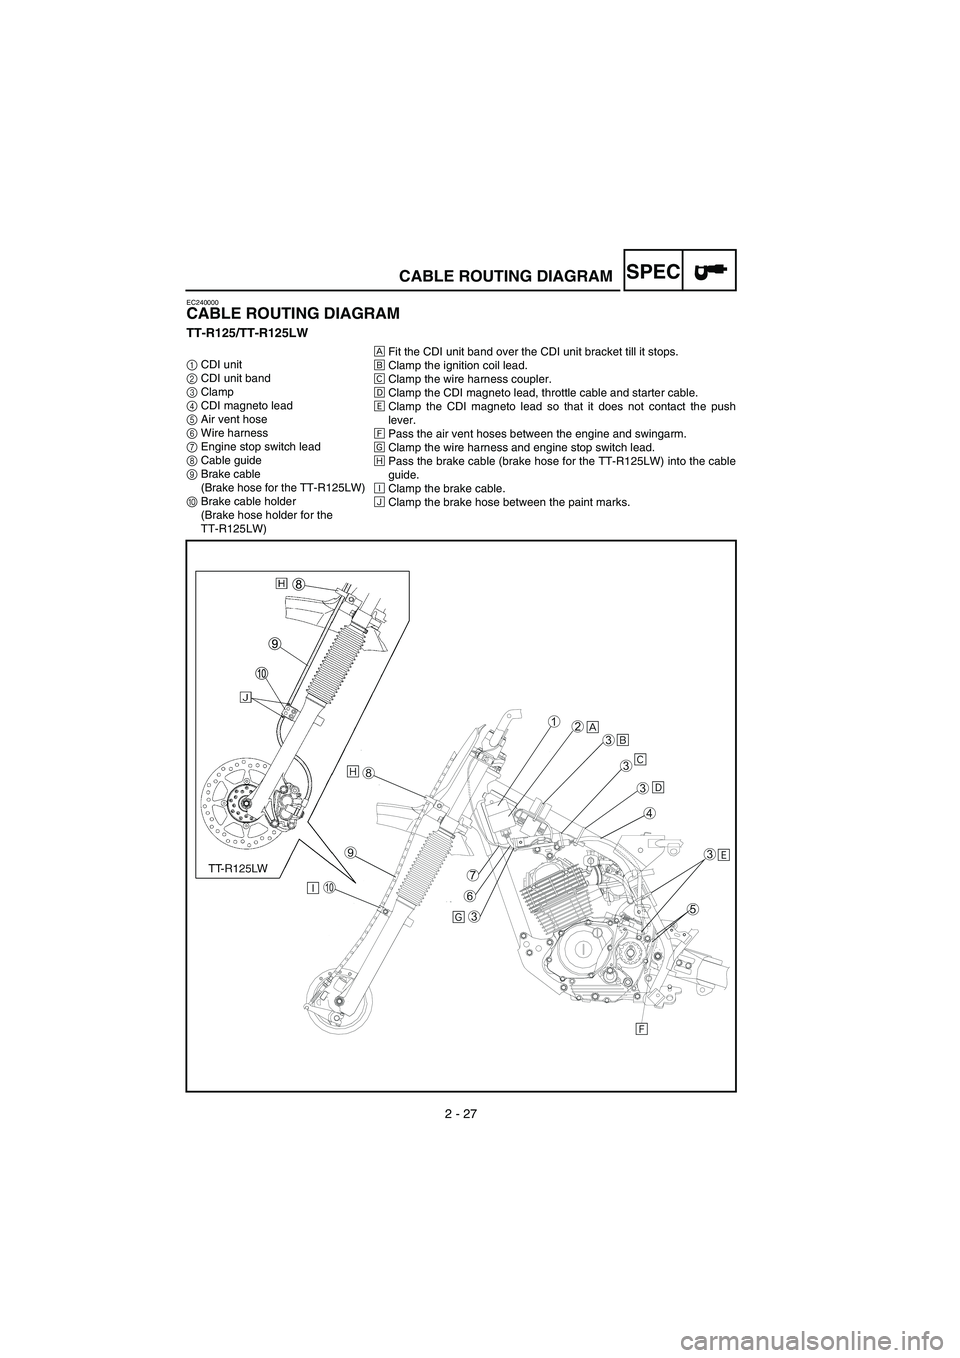 YAMAHA TTR125 2006  Owners Manual 152 - A - V
2 - 27
SPEC
EC240000
CABLE ROUTING DIAGRAM
TT-R125/TT-R125LW
1 CDI unit
2  CDI unit band
3  Clamp
4  CDI magneto lead
5  Air vent hose
6  Wire harness
7  Engine stop switch lead
8  Cable g